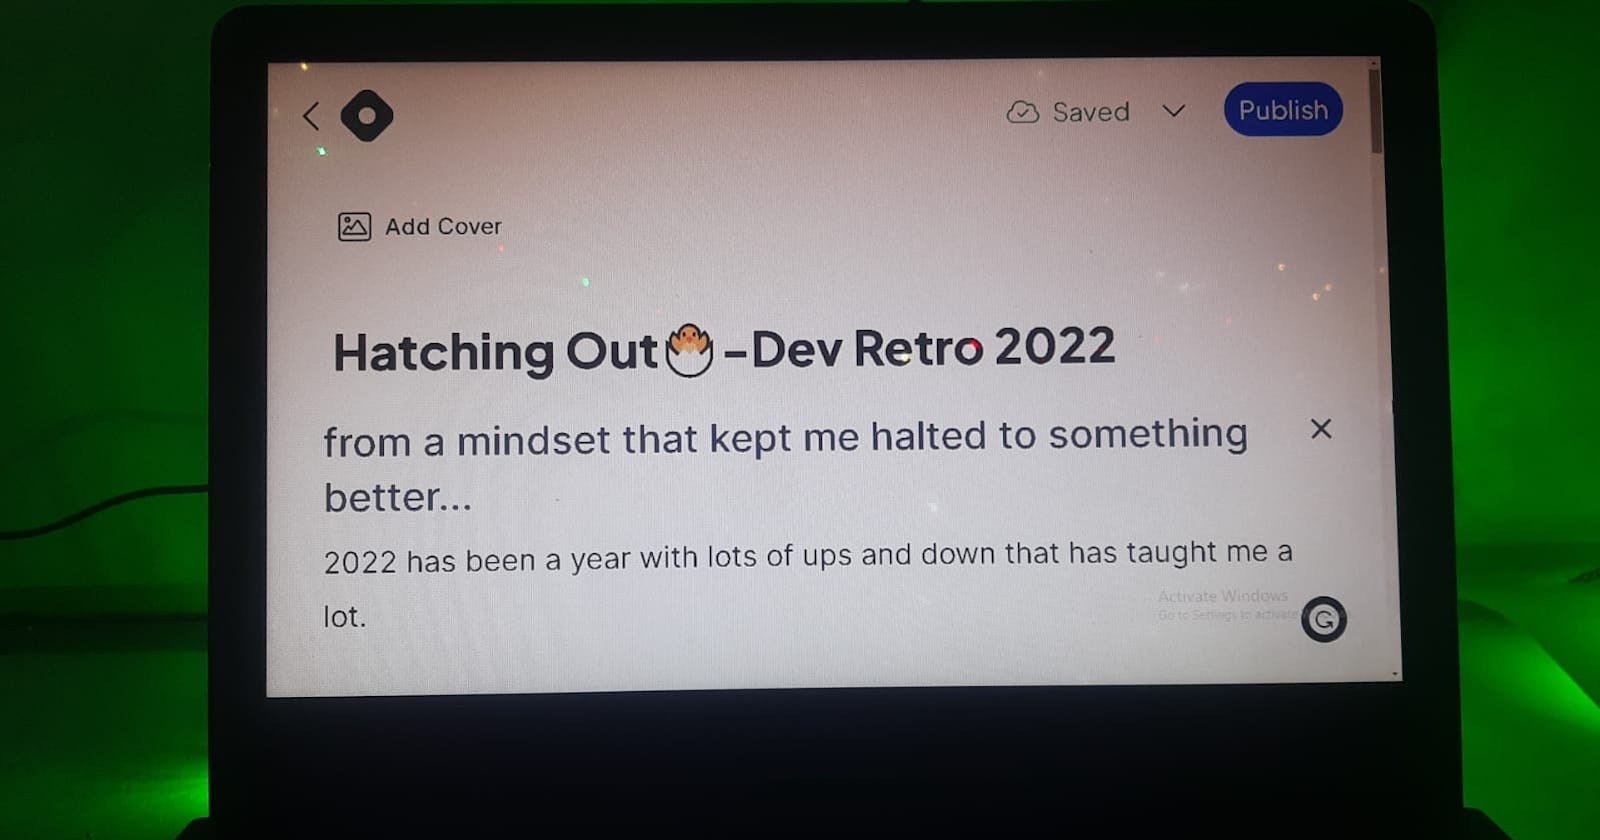 Hatching Out🐣-Dev Retro 2022